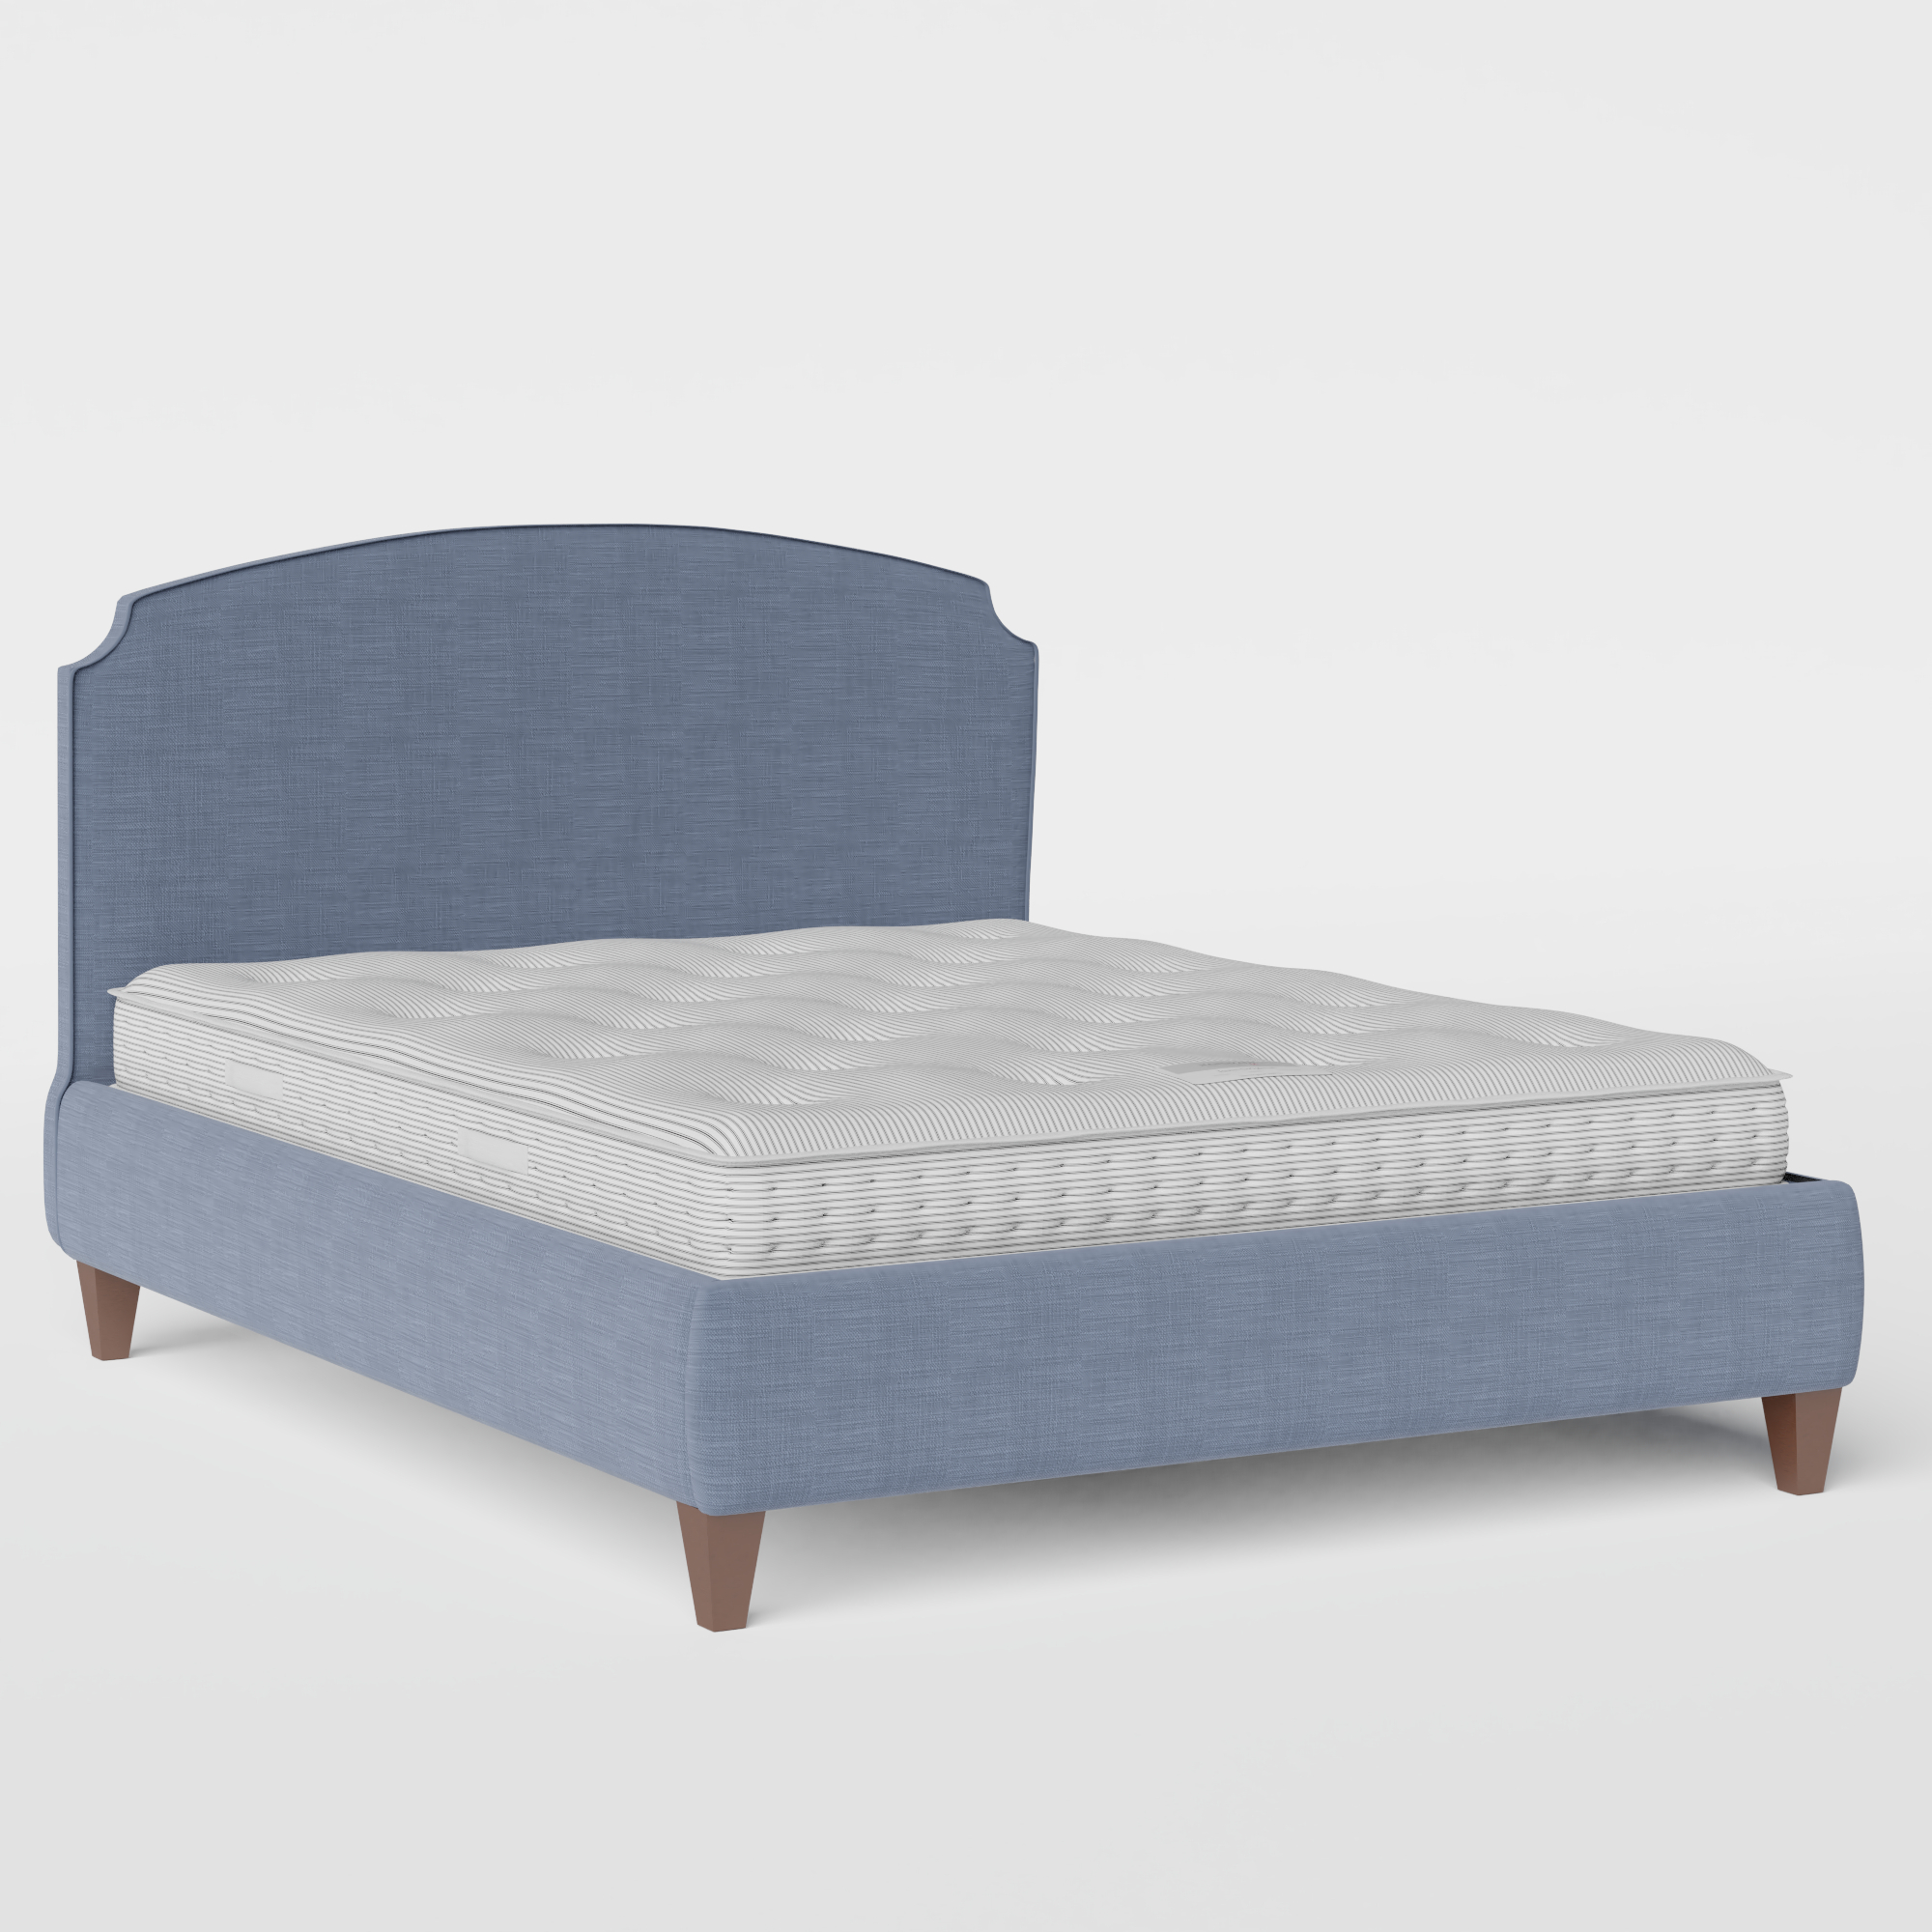 Lide with Piping stoffen bed in blauw